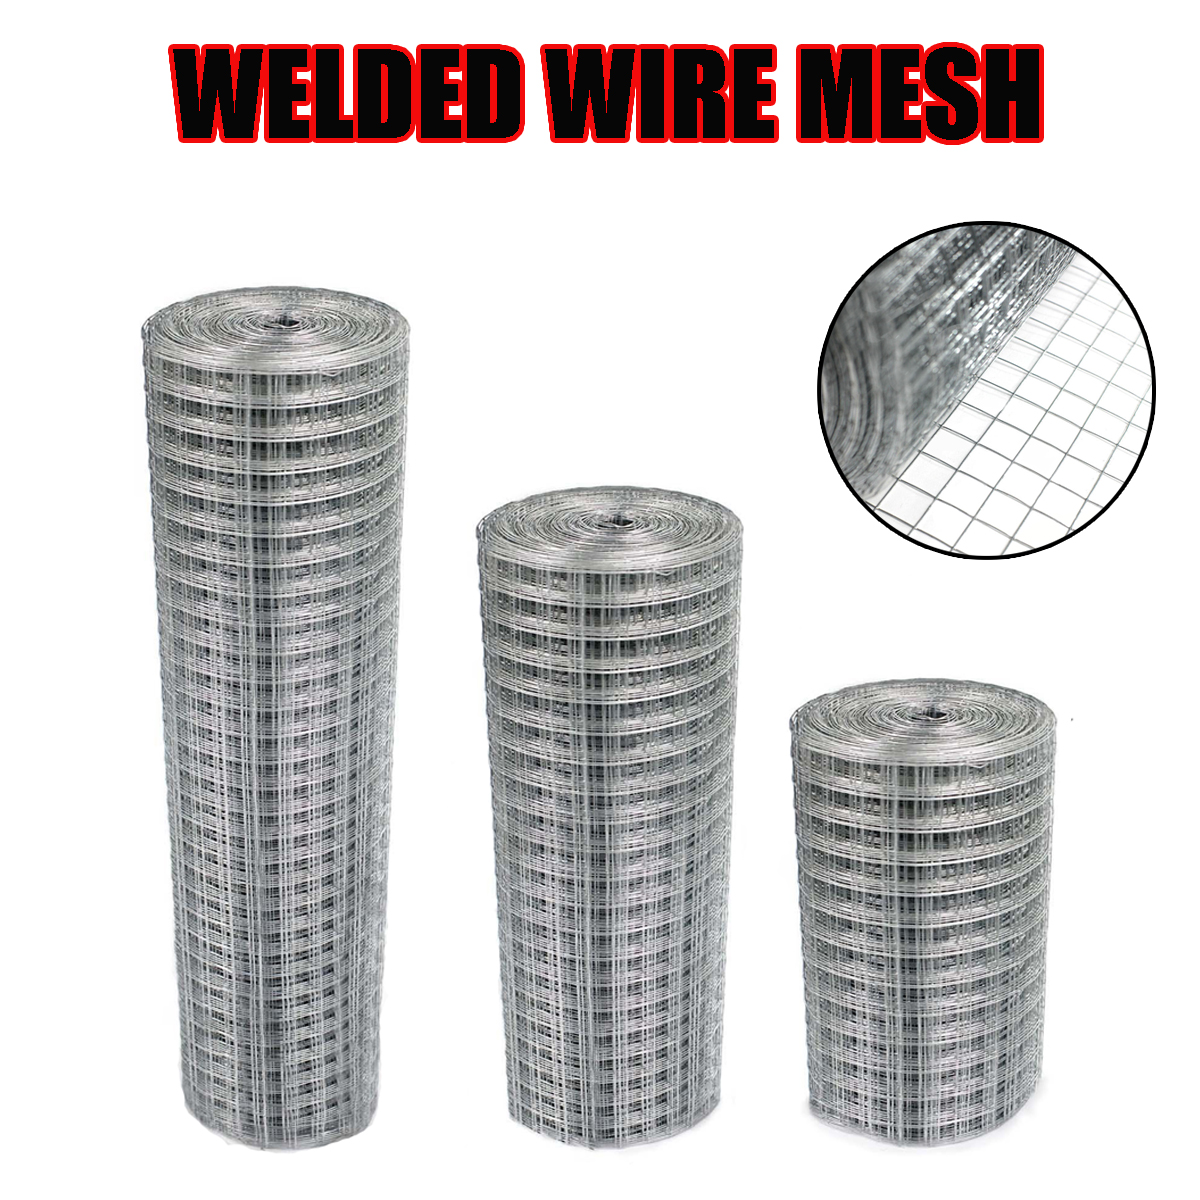 Welded-Galvanised-Wire-Mesh-Fence-1x1-Inch-Aviary-Rabbit-Hutch-Chicken-Coop-Pet-1403161